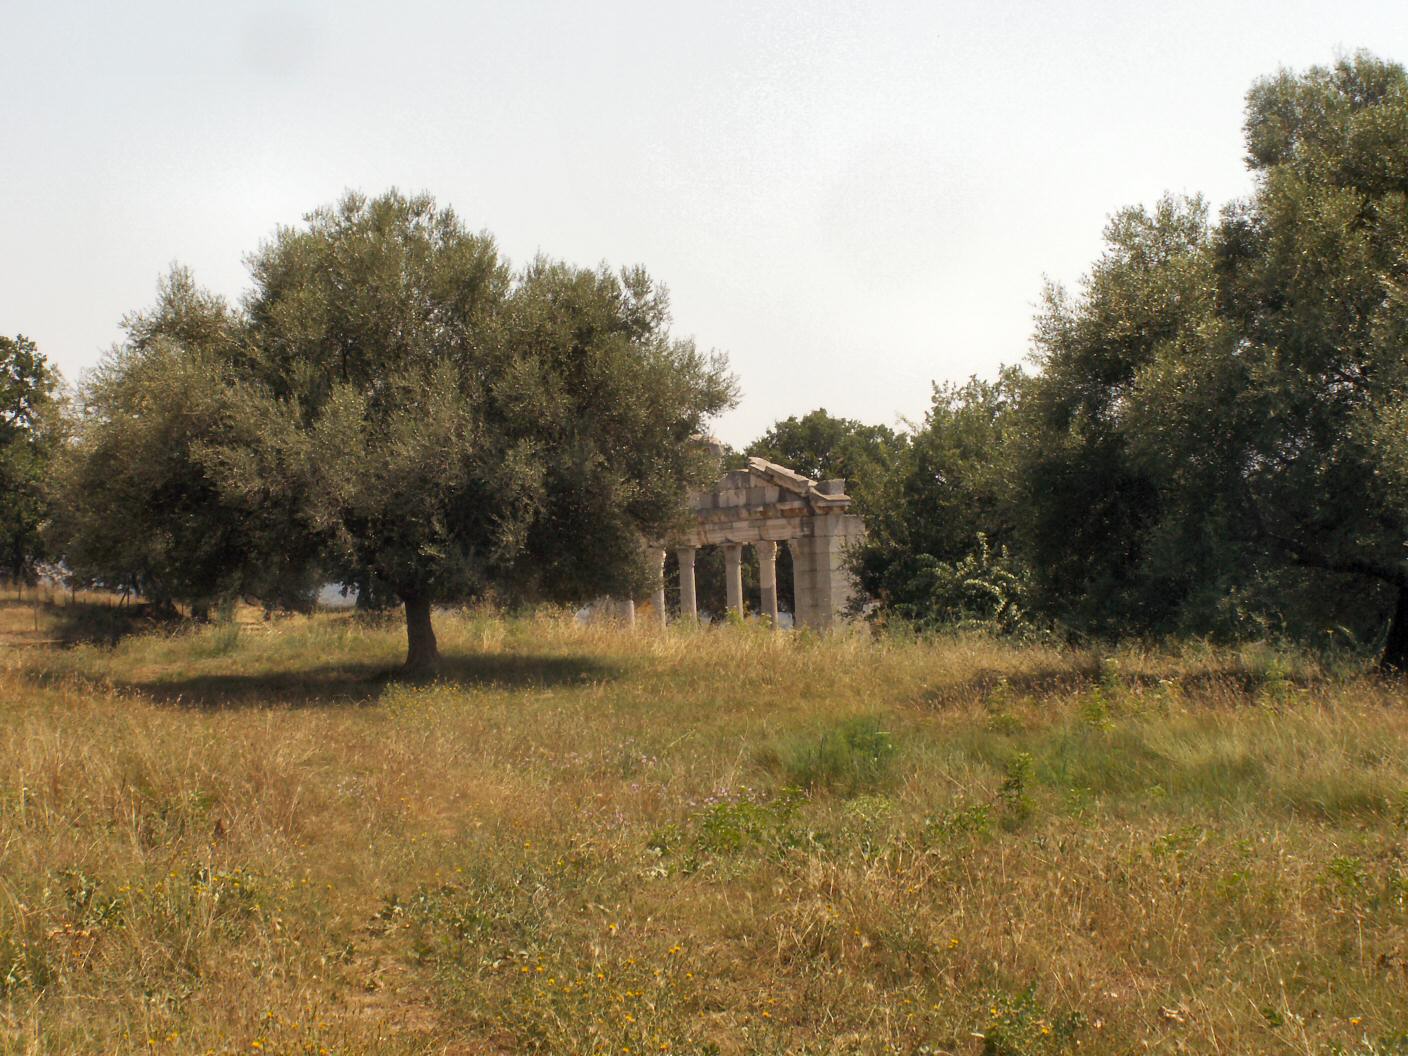 an old building sits in a field that is not surrounded by trees